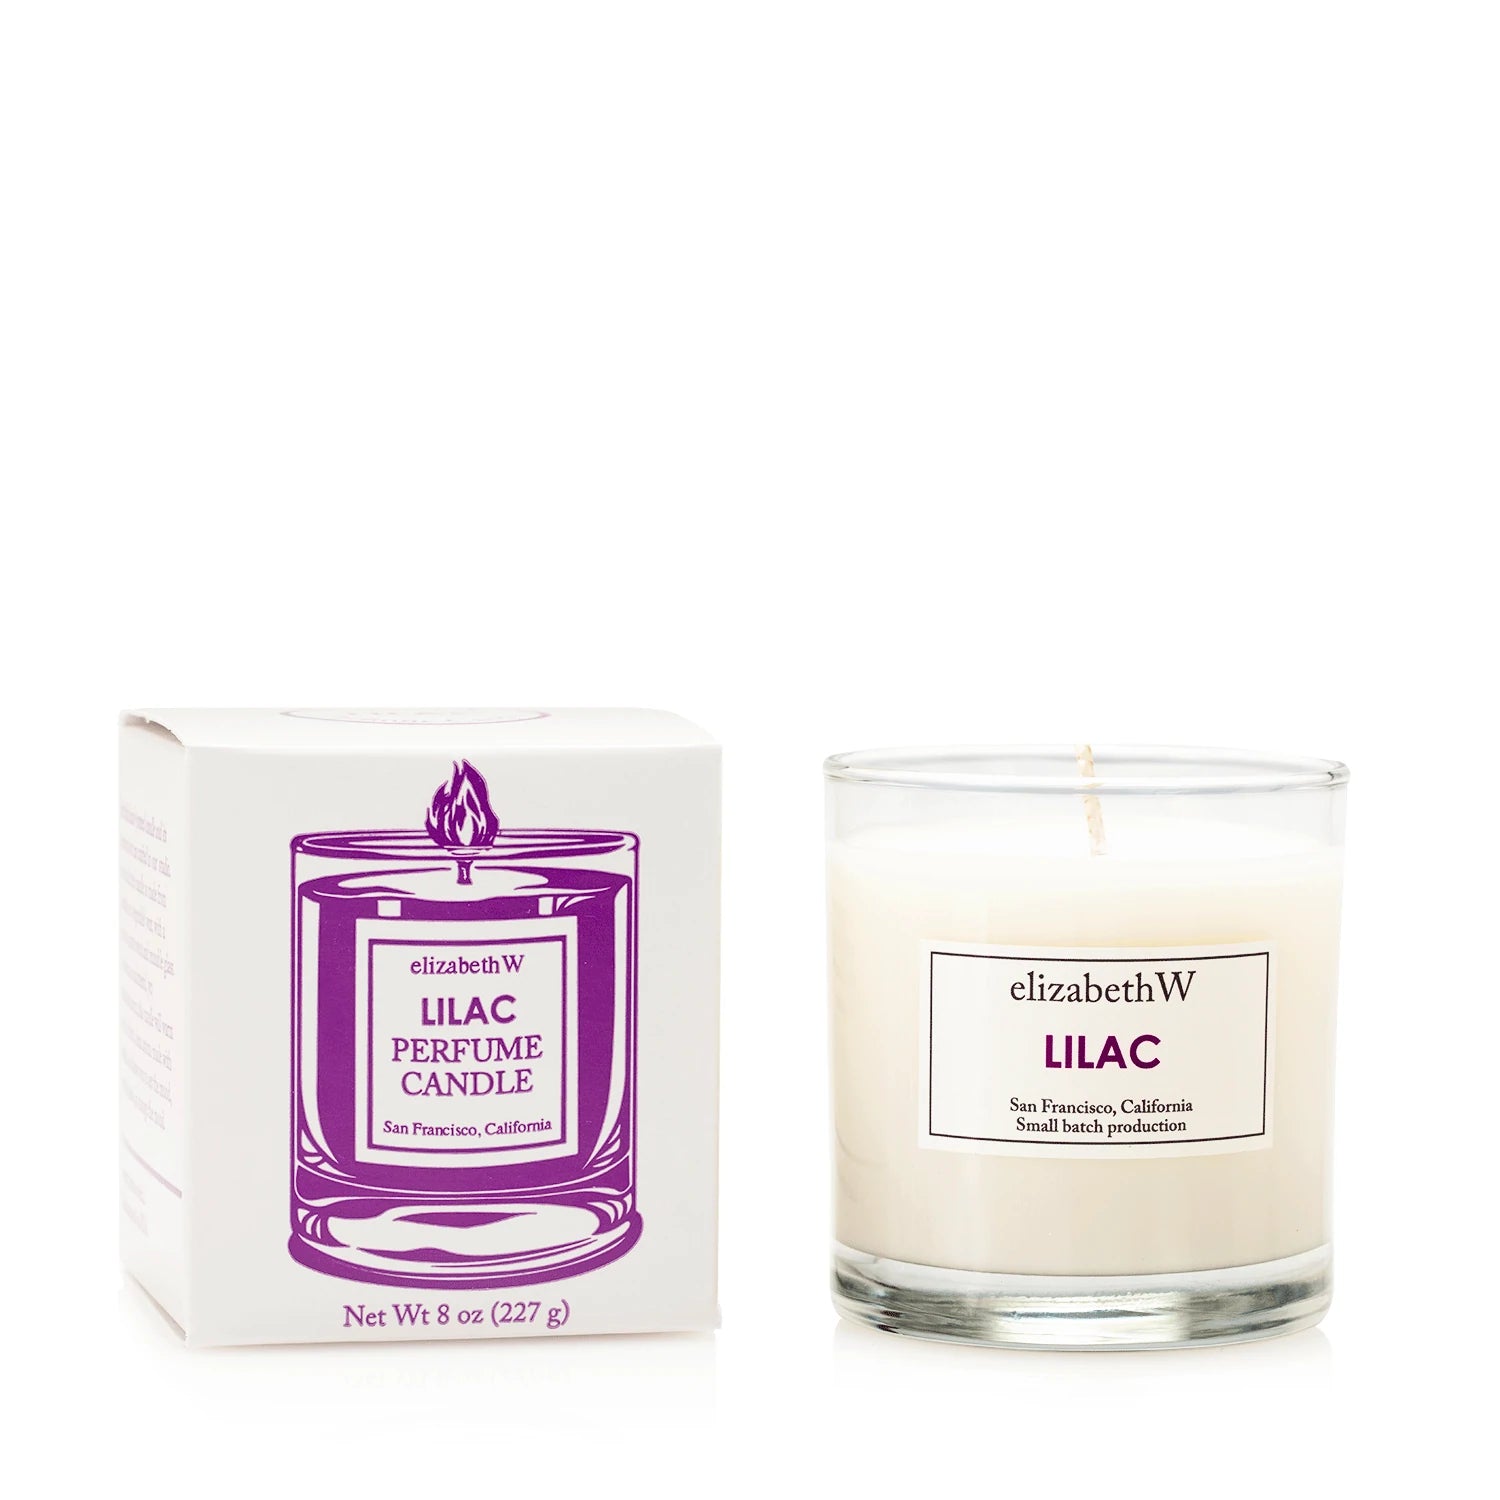 Lilac Perfume Candles